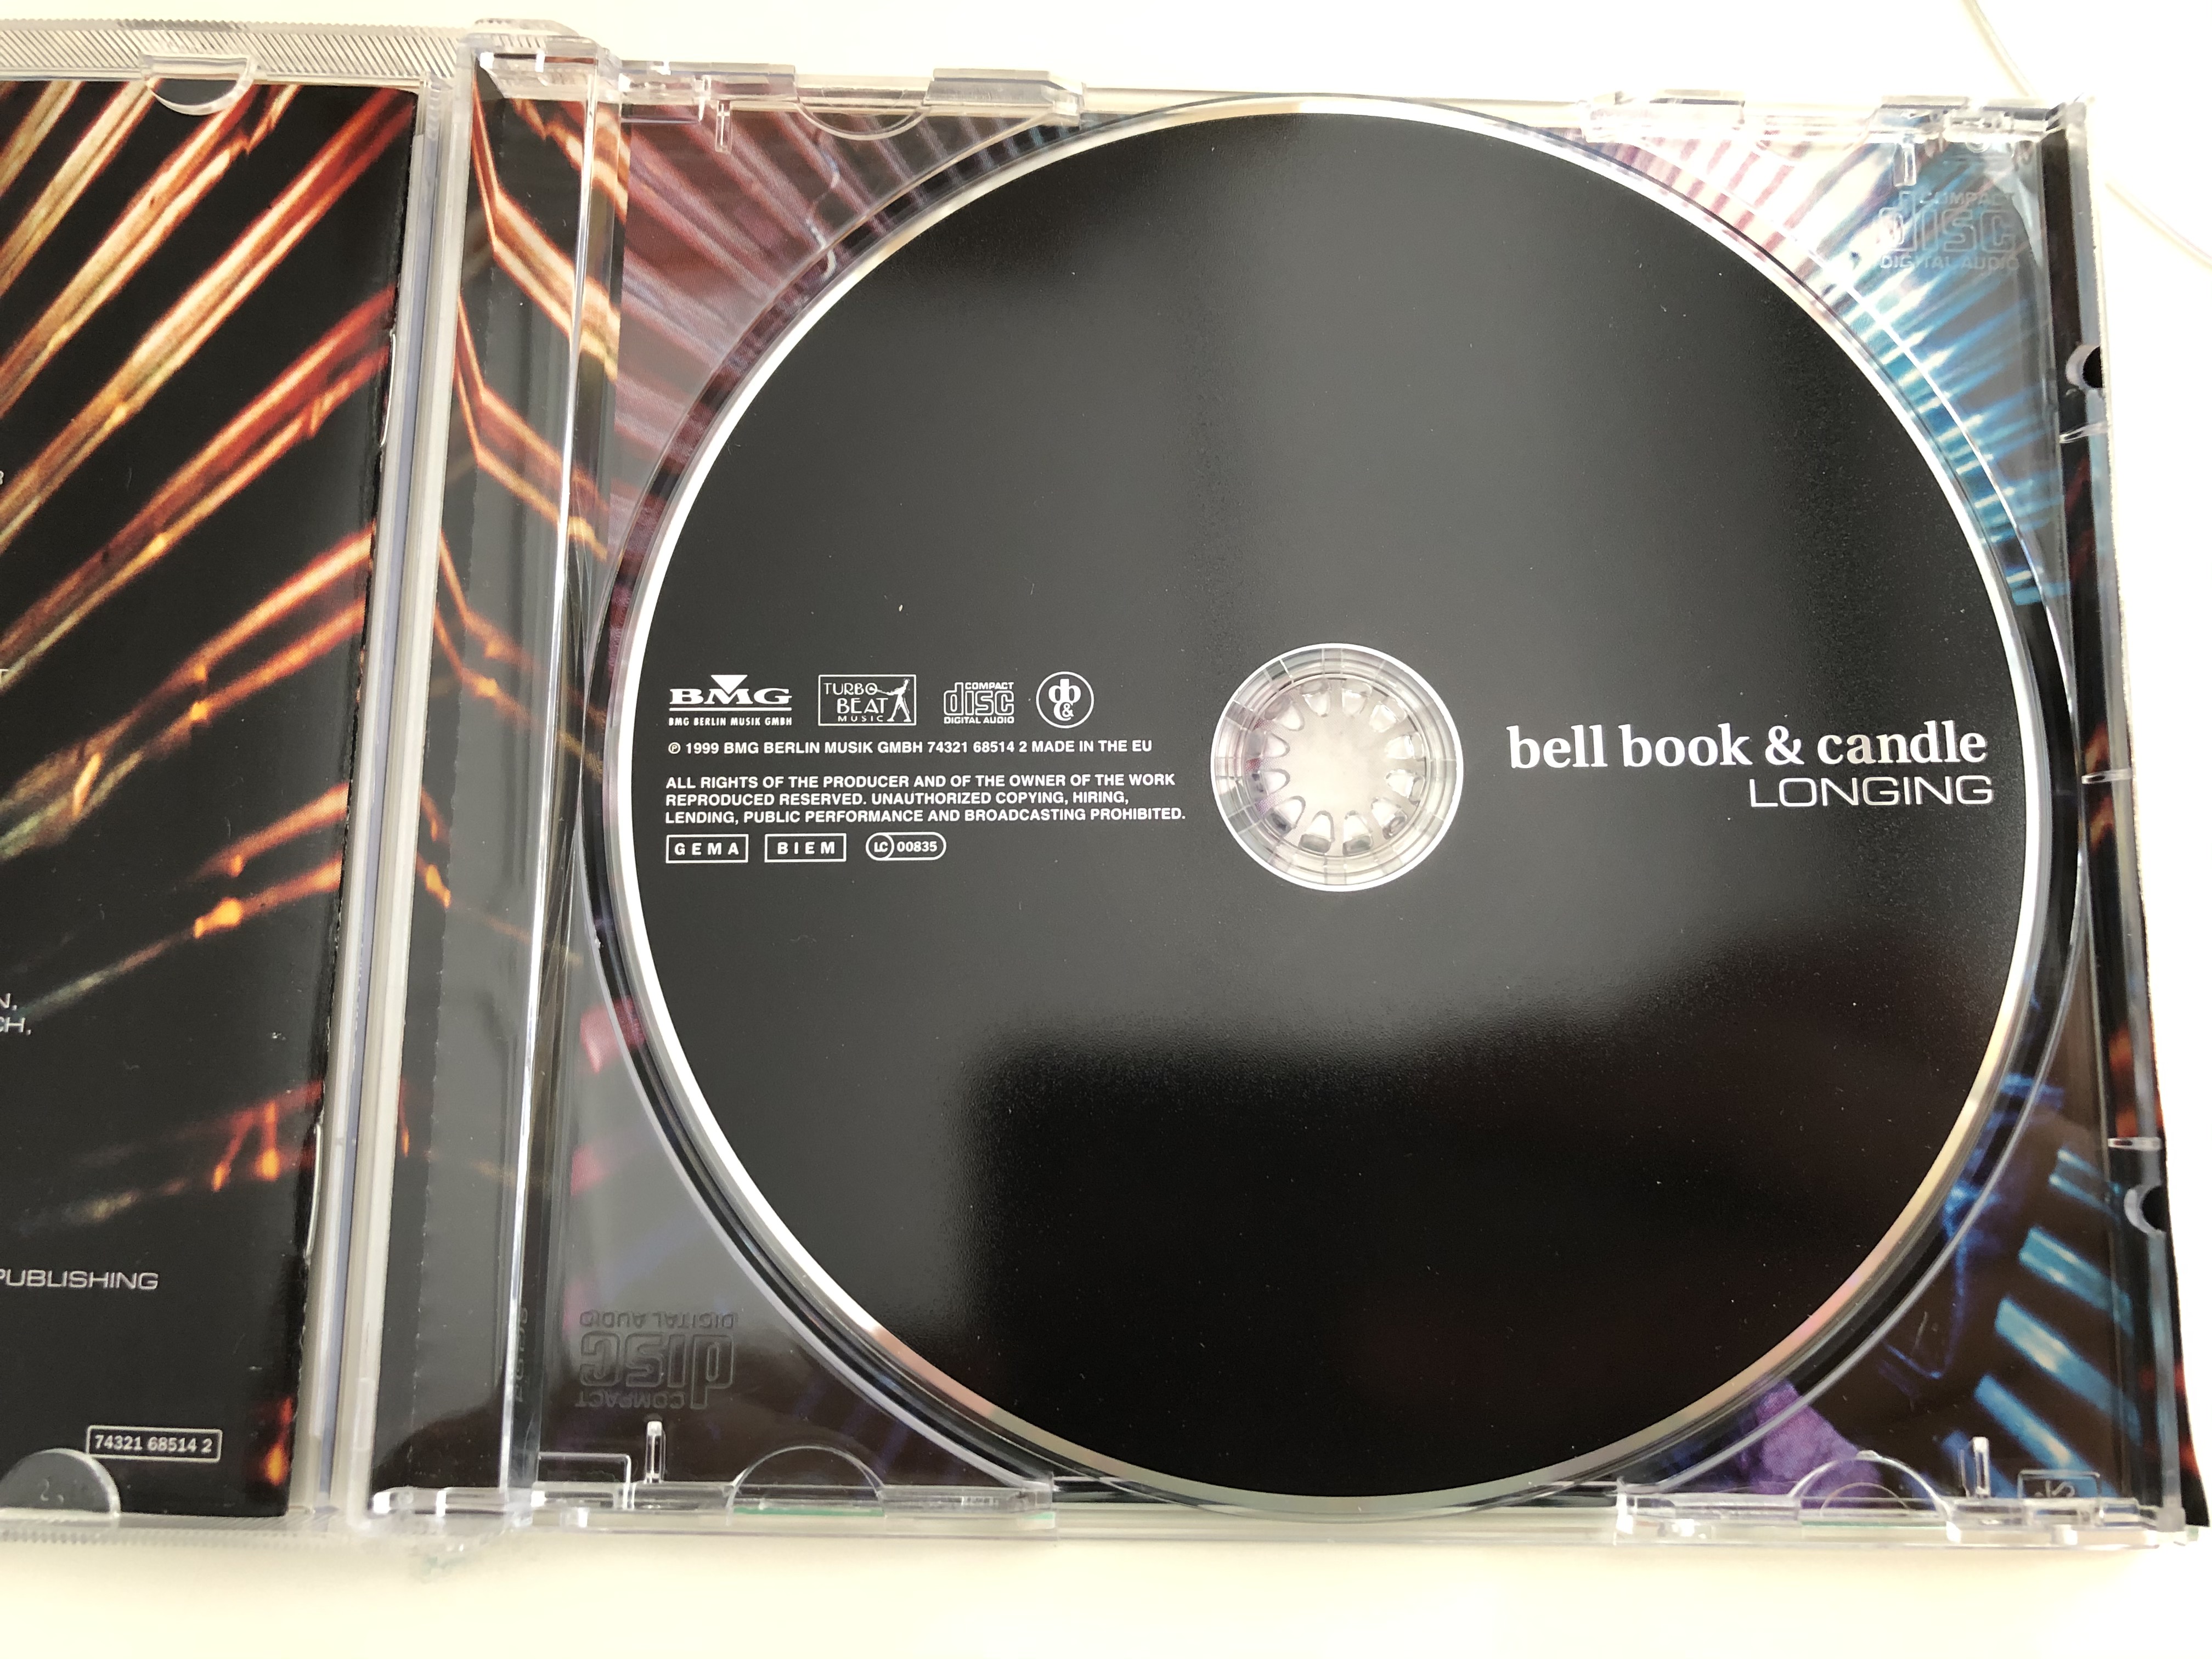 bell-book-candle-longing-incl.-multimedia-track-for-mac-pc-bmg-berlin-musik-gmbh-audio-cd-1999-74321-68514-2-7-.jpg